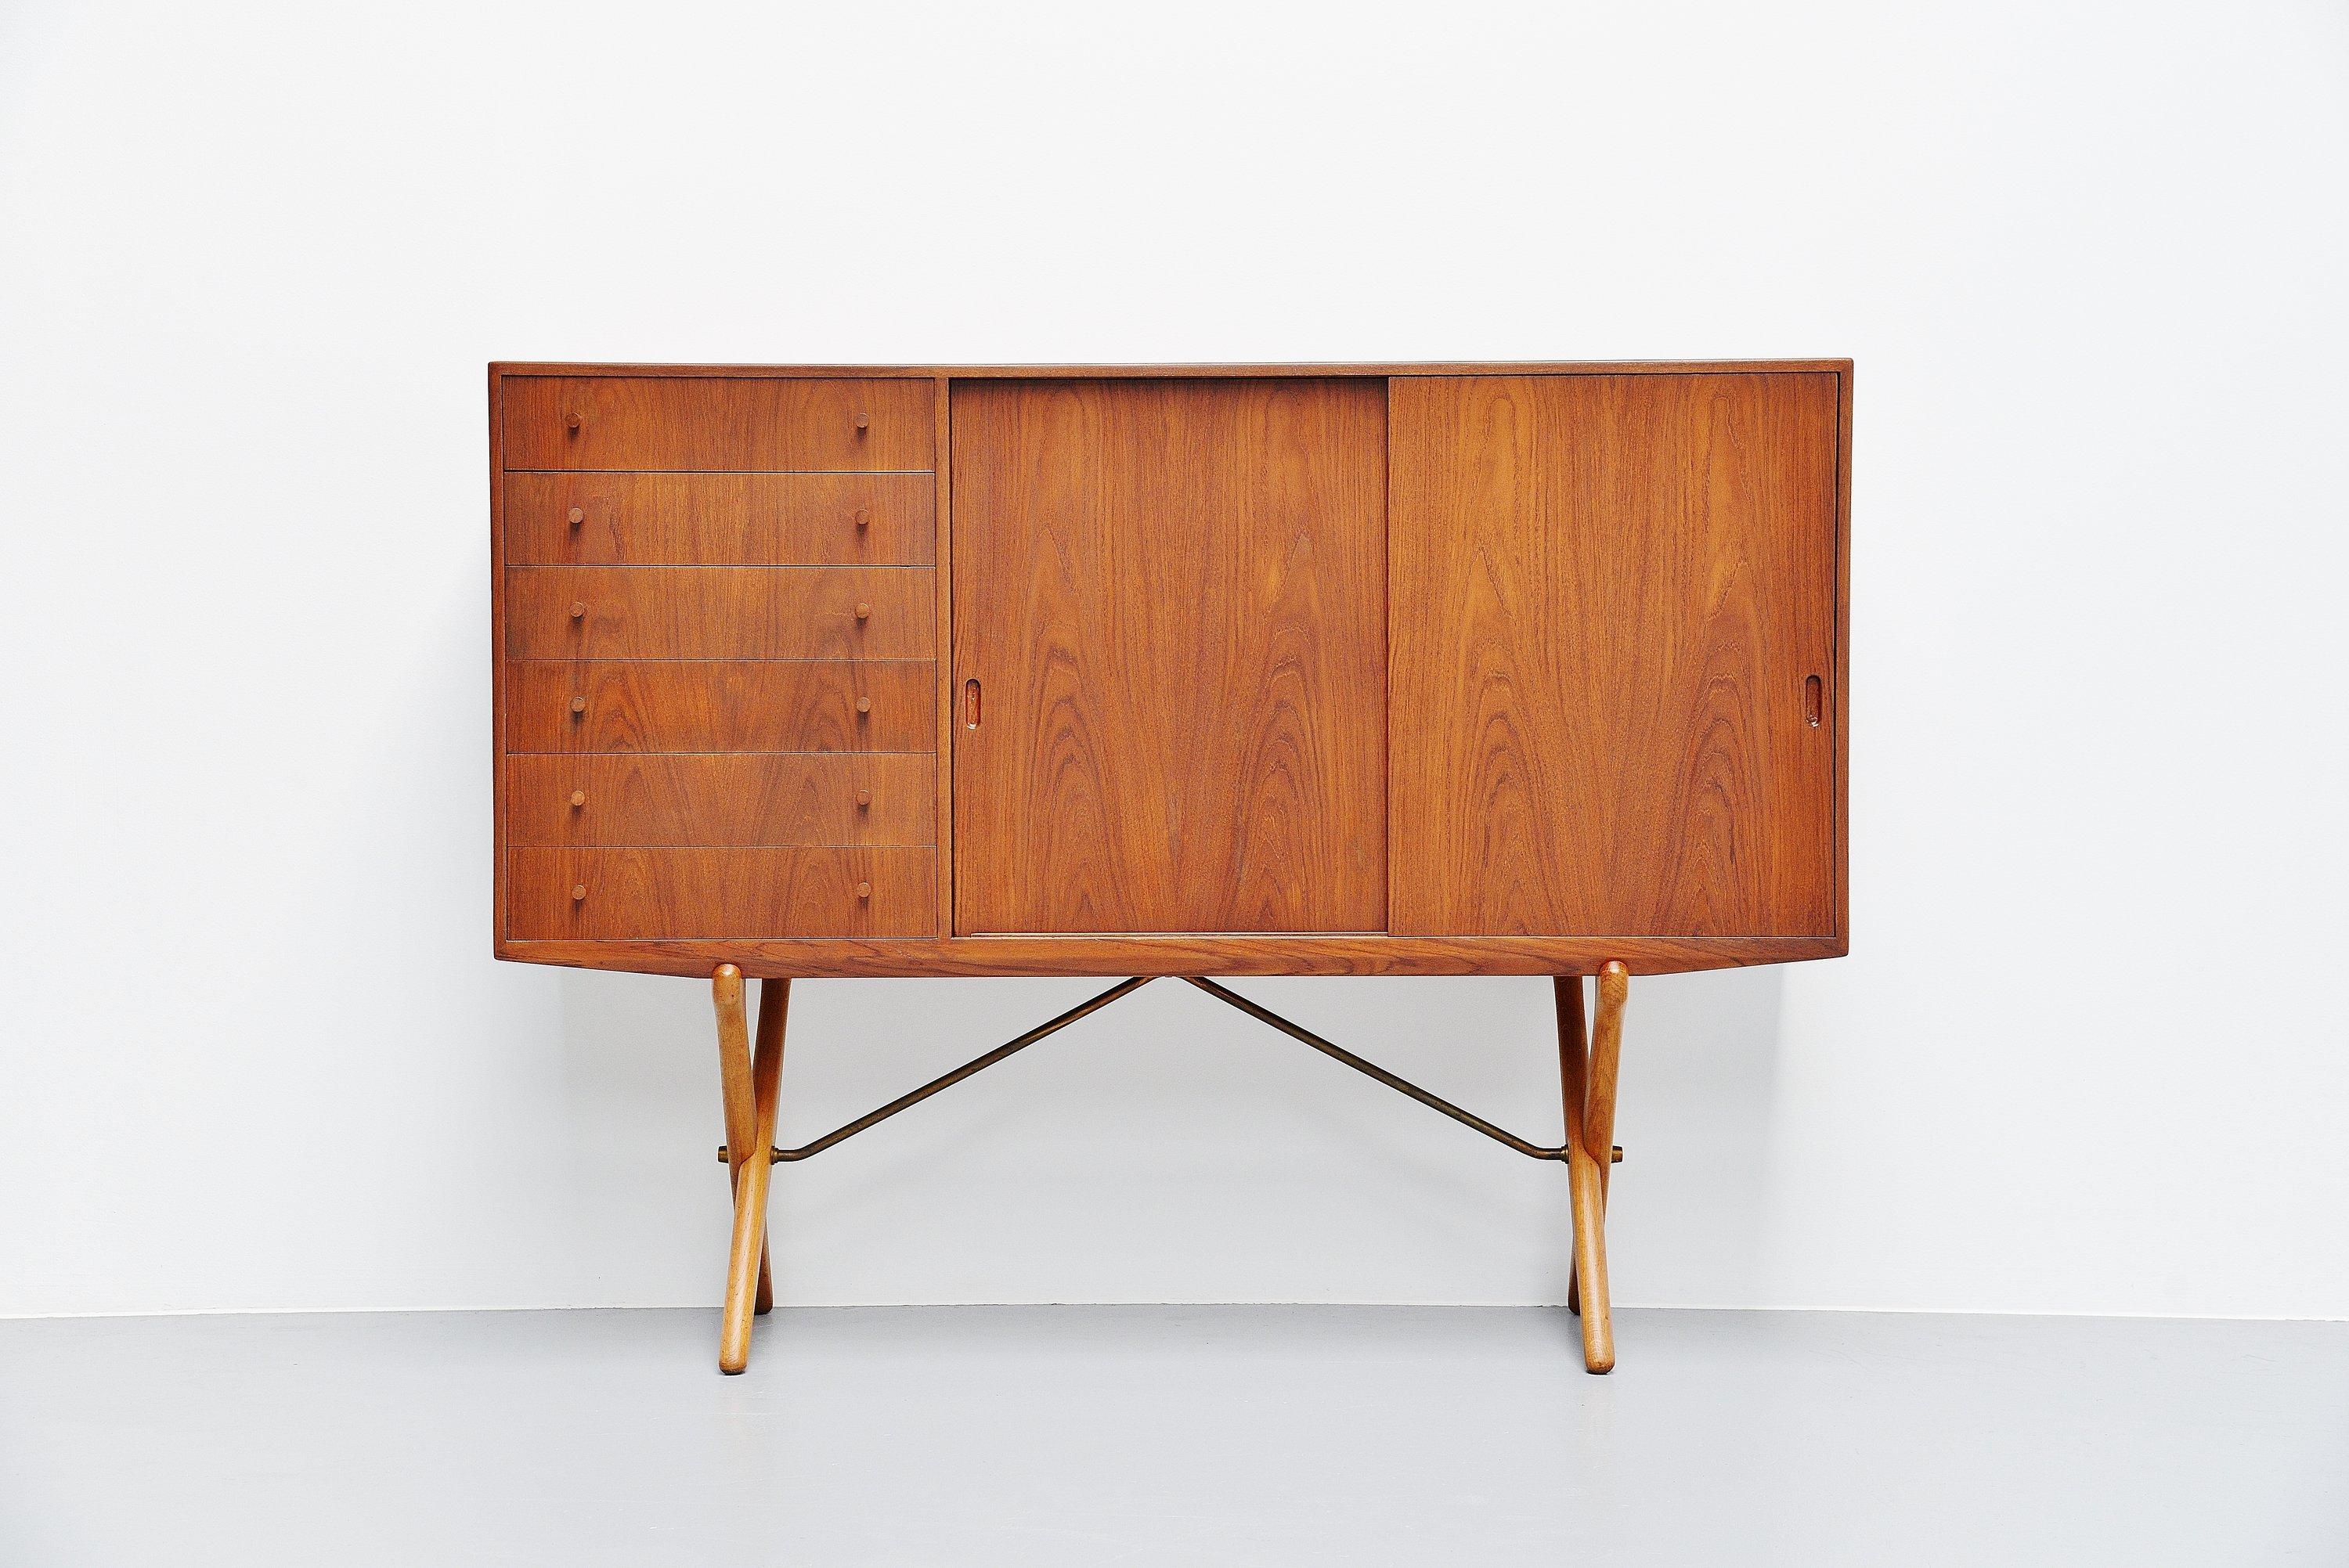 Fantastic high cabinet model CH-304 designed by Hans J. Wegner and manufactured by Carl Hansen & son, Denmark, 1953. The cabinet has solid oak legs connected with brass bars, the cabinet is made of teak veneer and is fully refinished. The left past